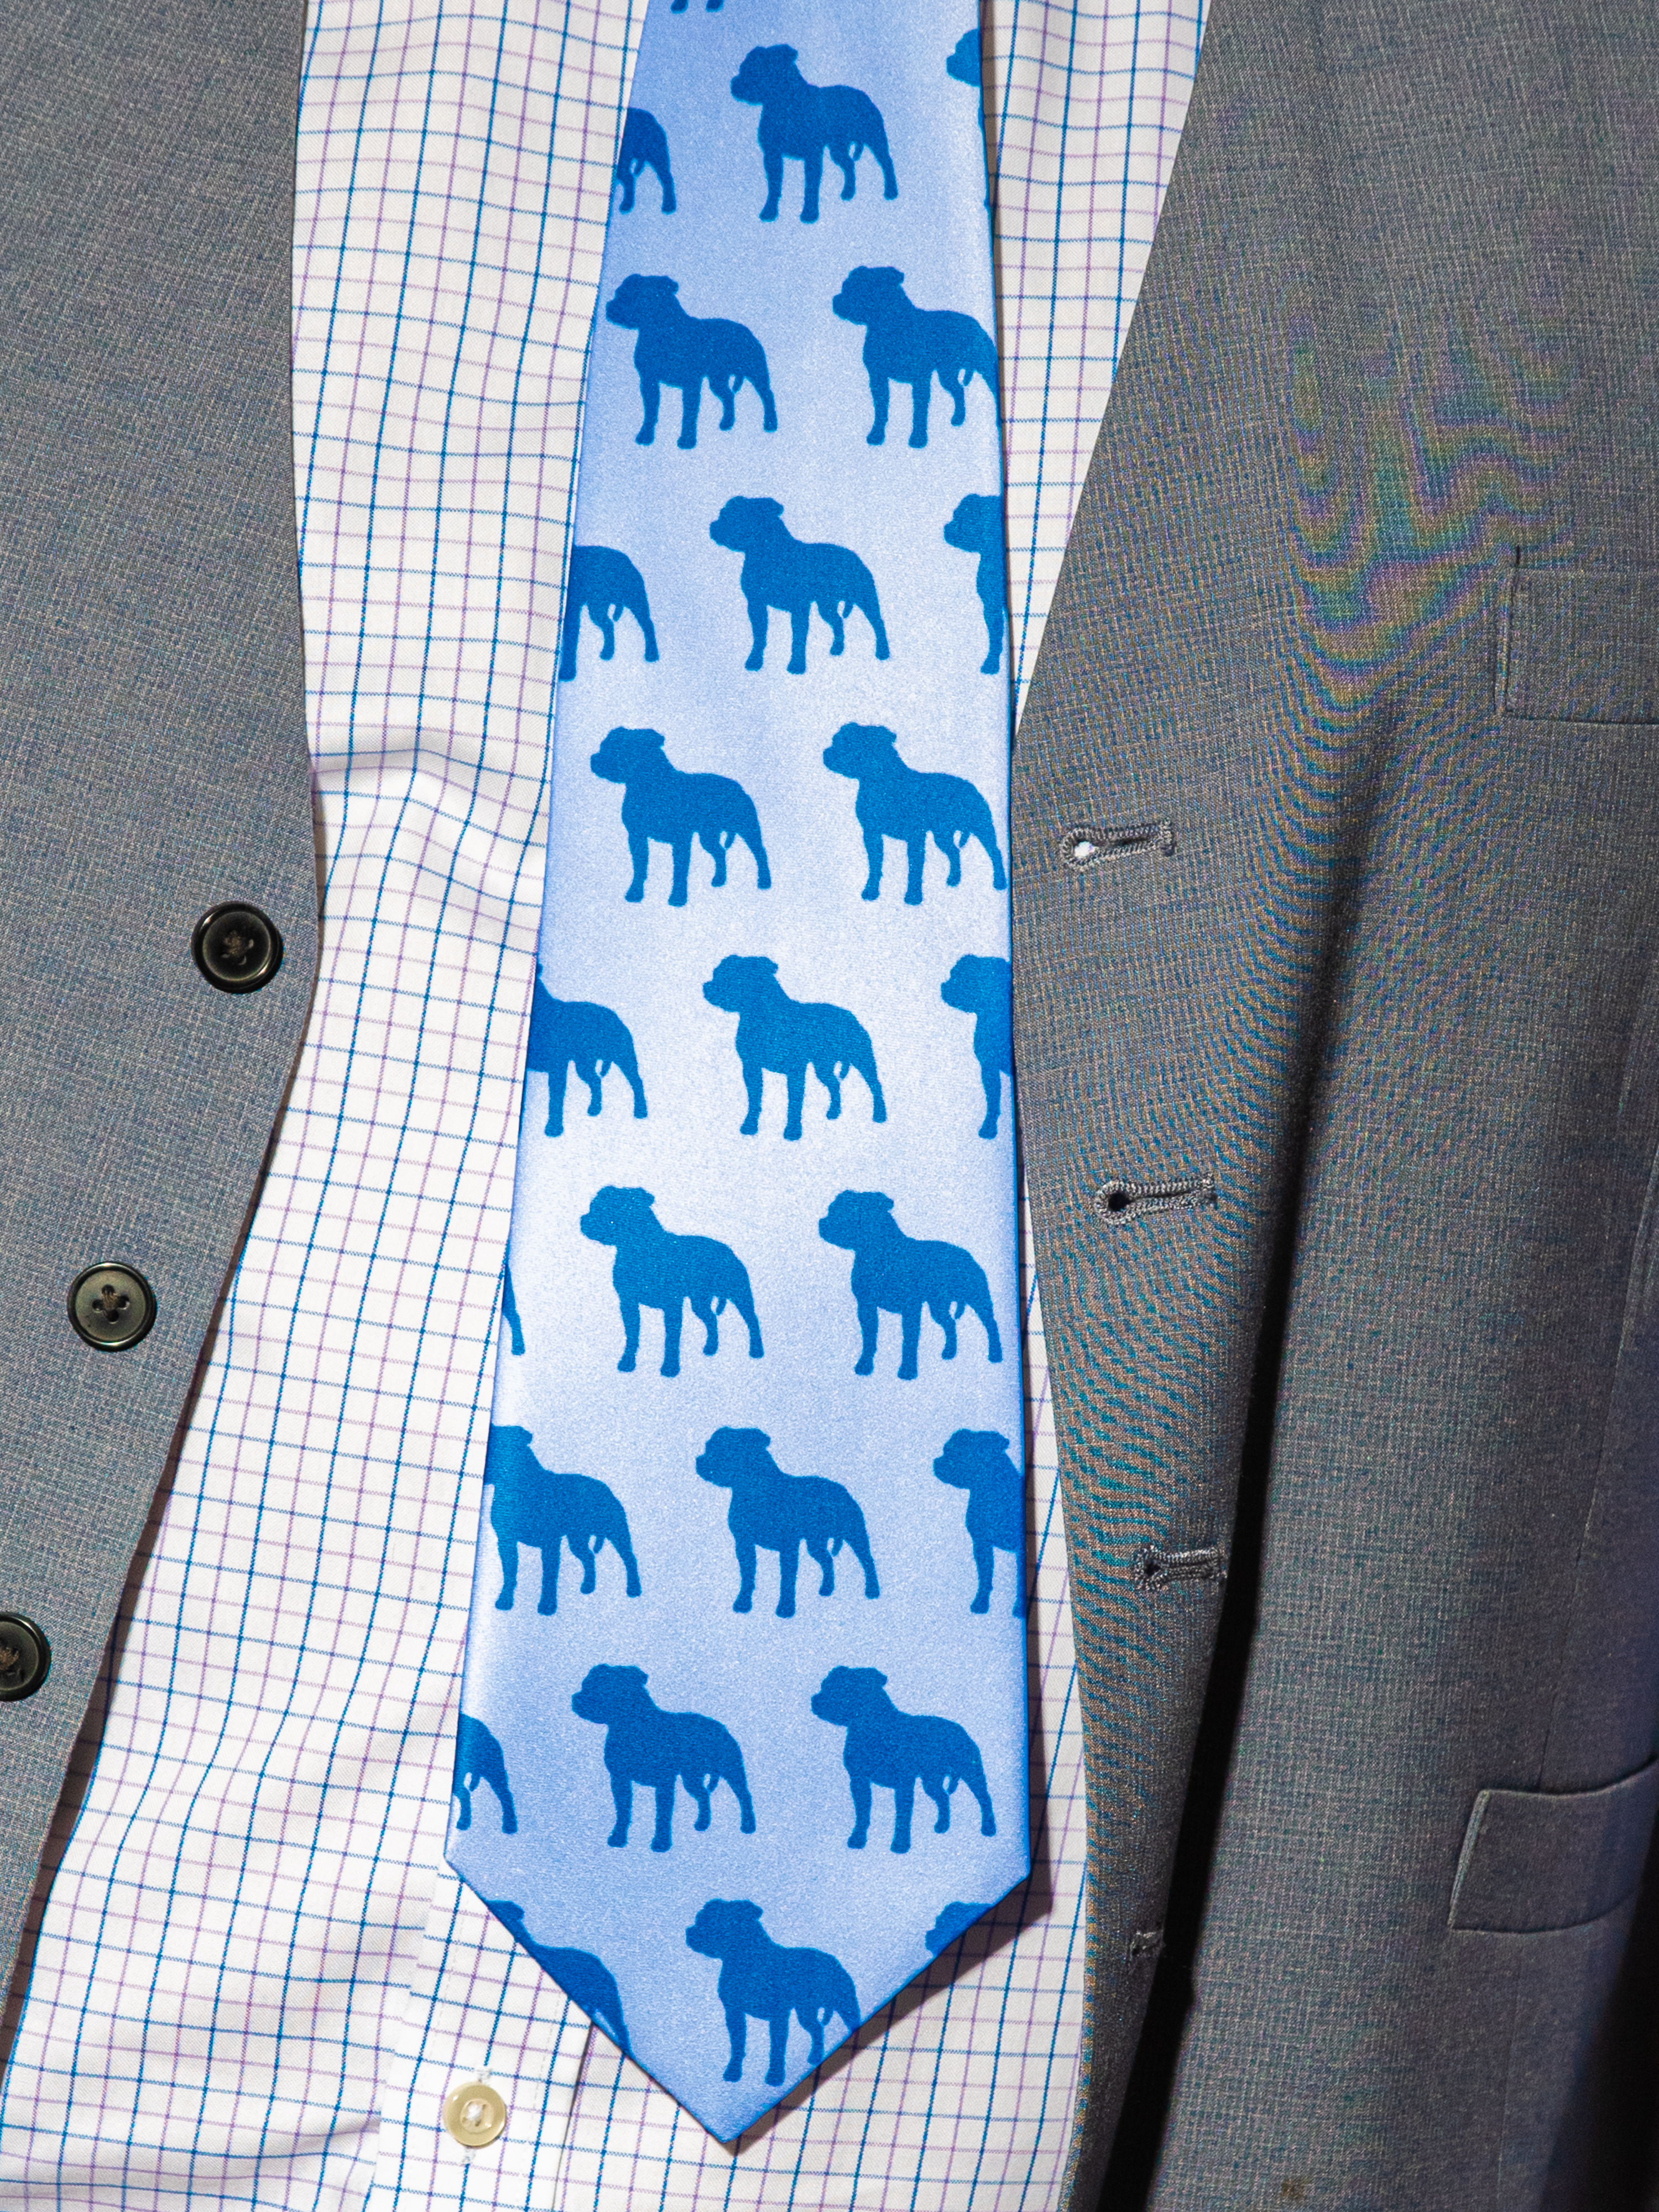 A man sports a Pitbull tie at the Westminster Dog Show in New York City on Feb. 10, 2020.